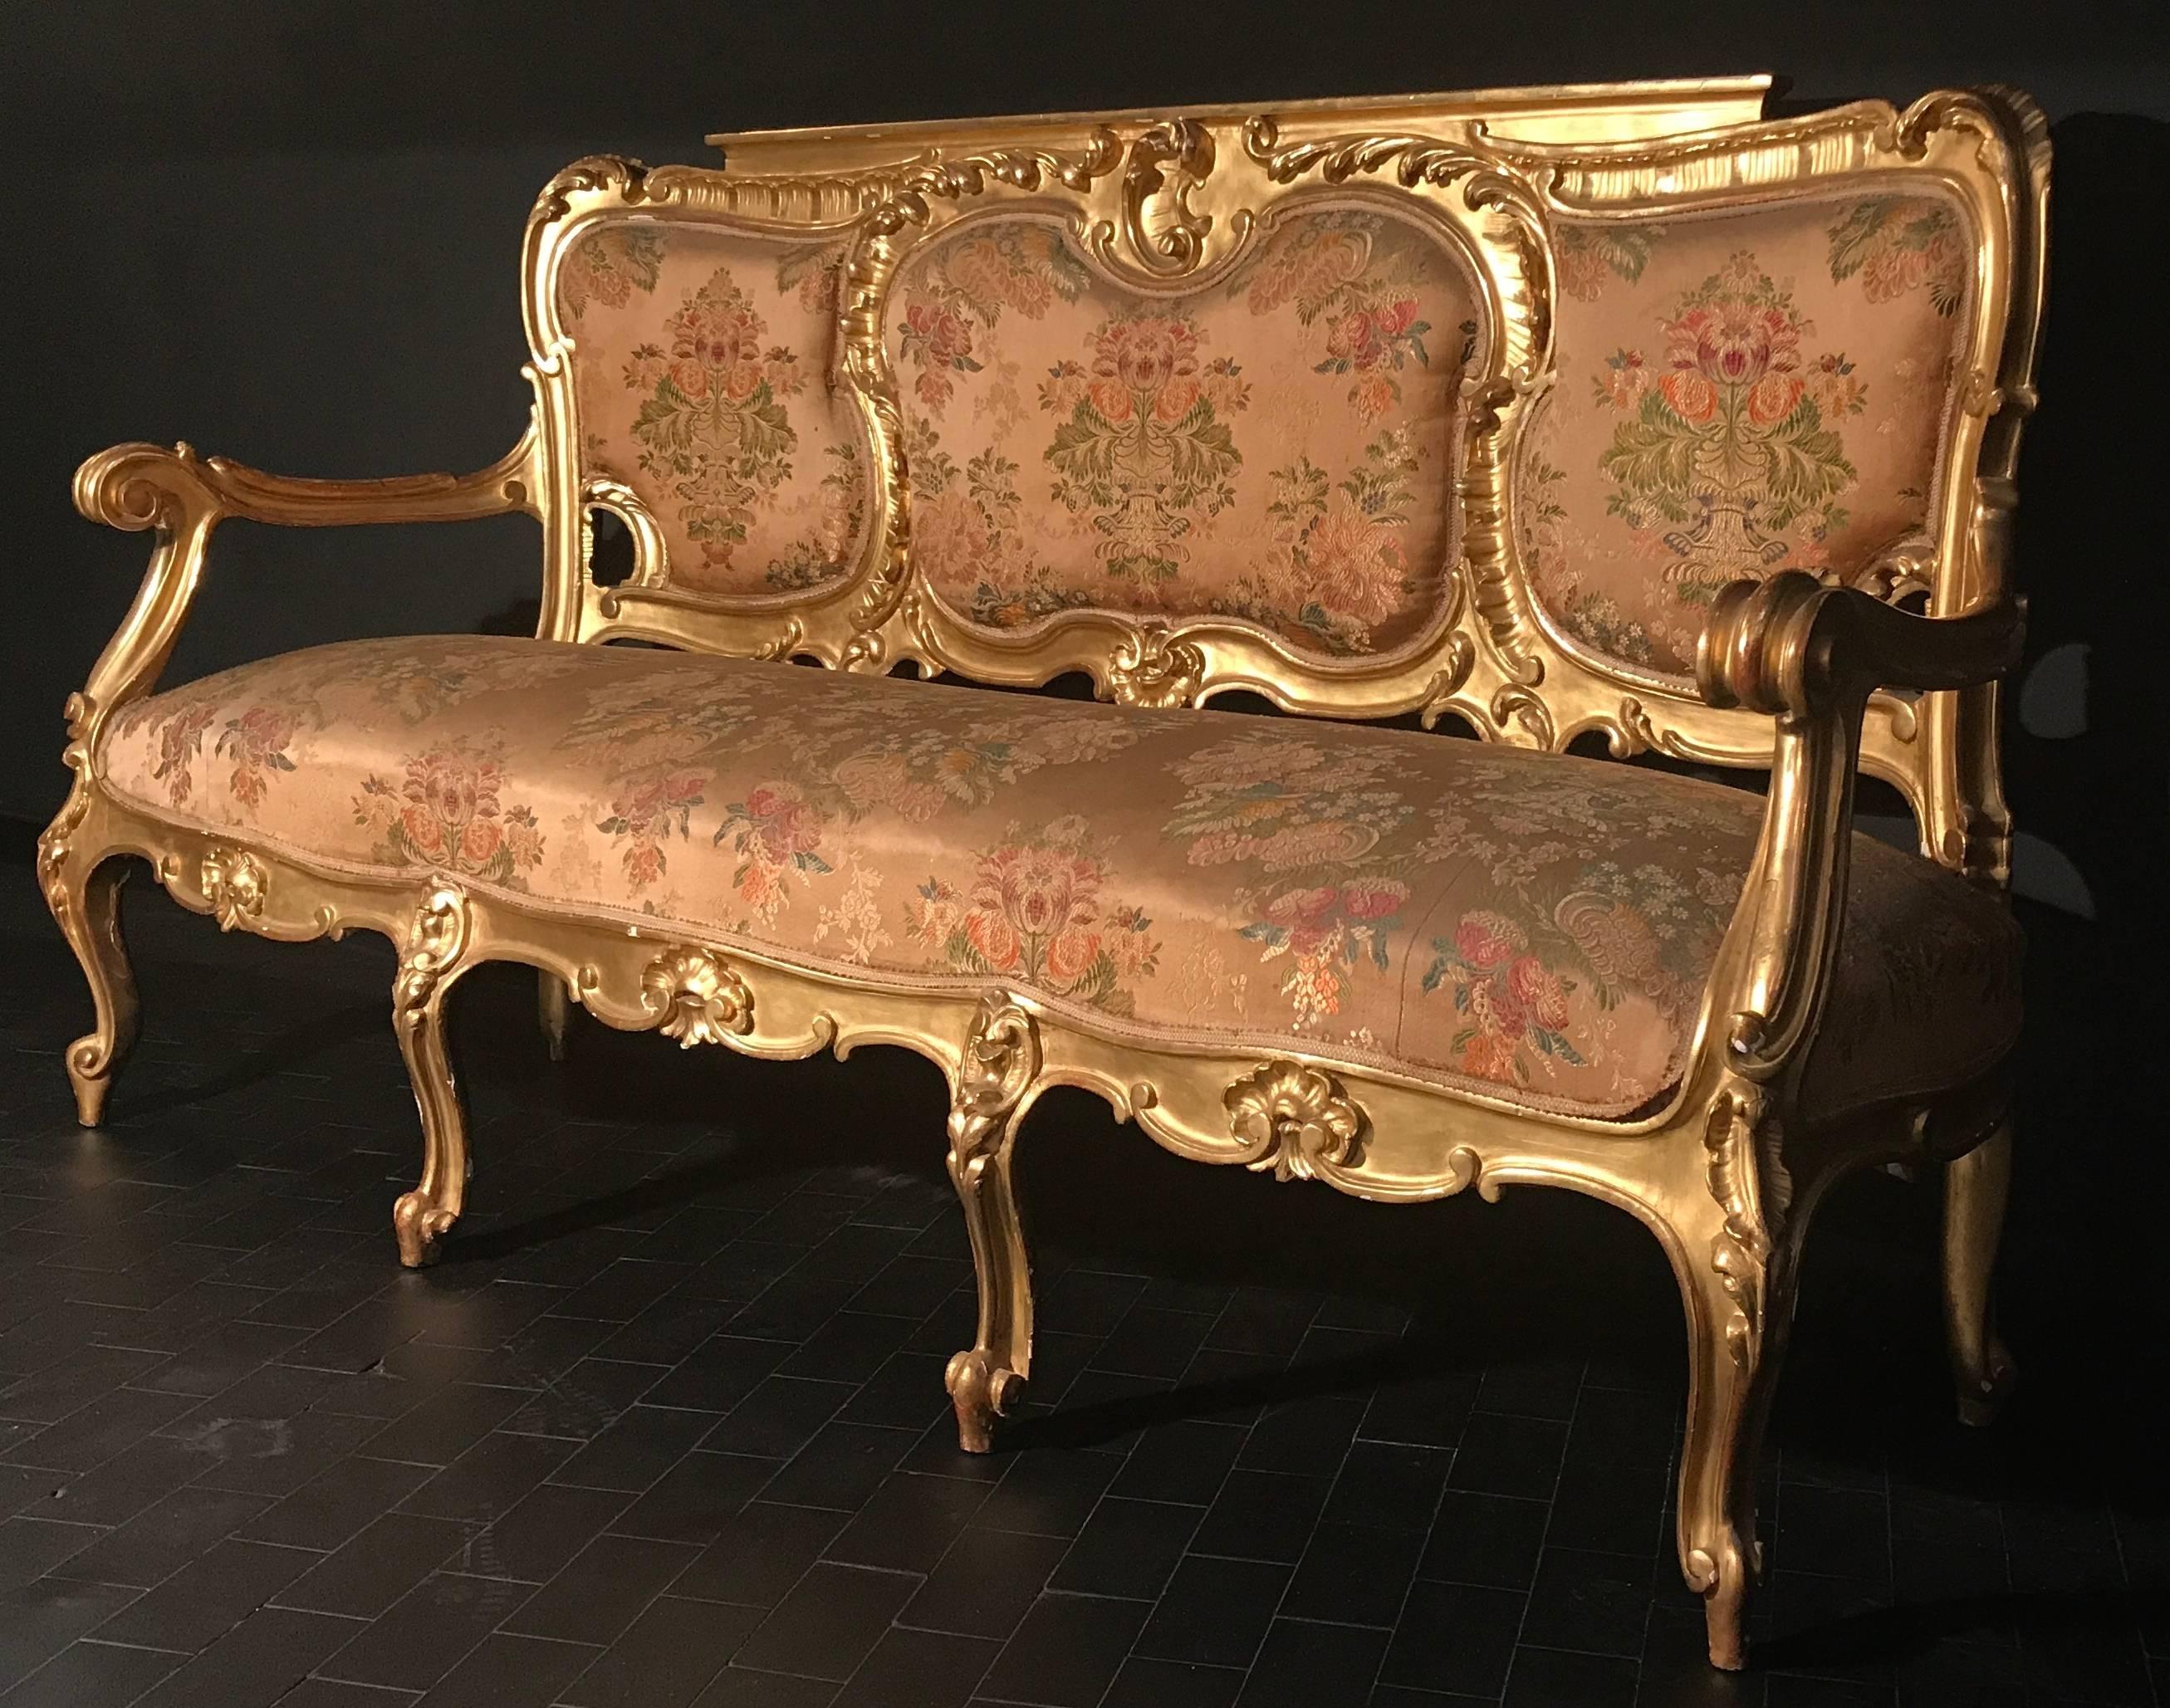 Louis XV Italian 19th Century Gilt Living Room Suite with a Sofa and Pair of Armchairs For Sale